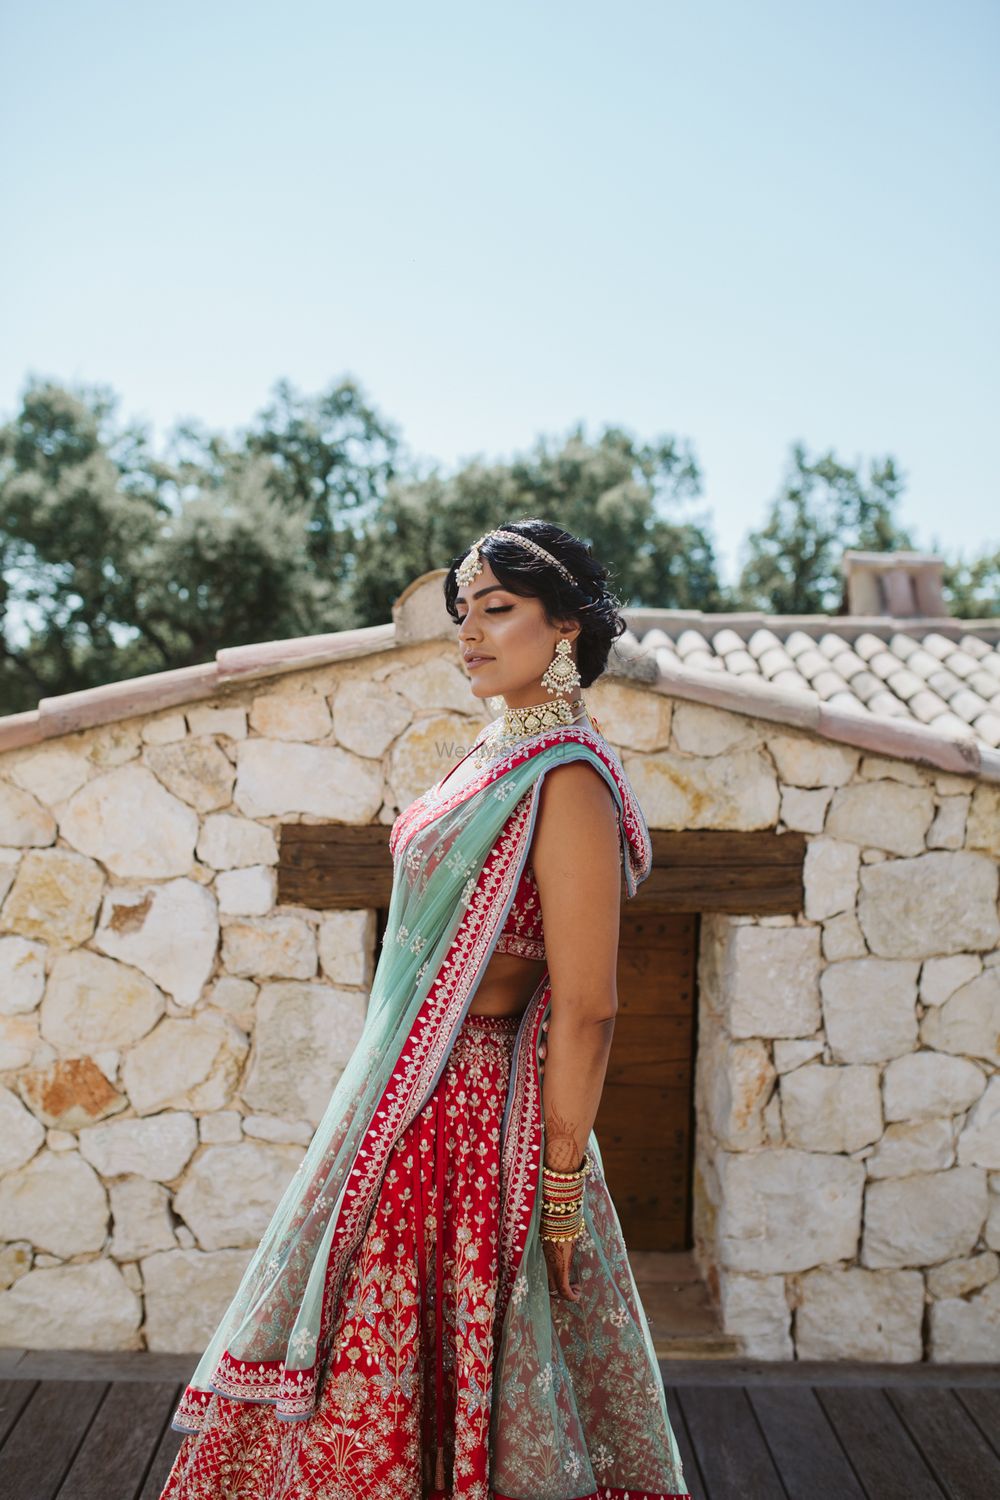 Photo of Bride in a pink lehenga with an icy blue dupatta in contrasting look.